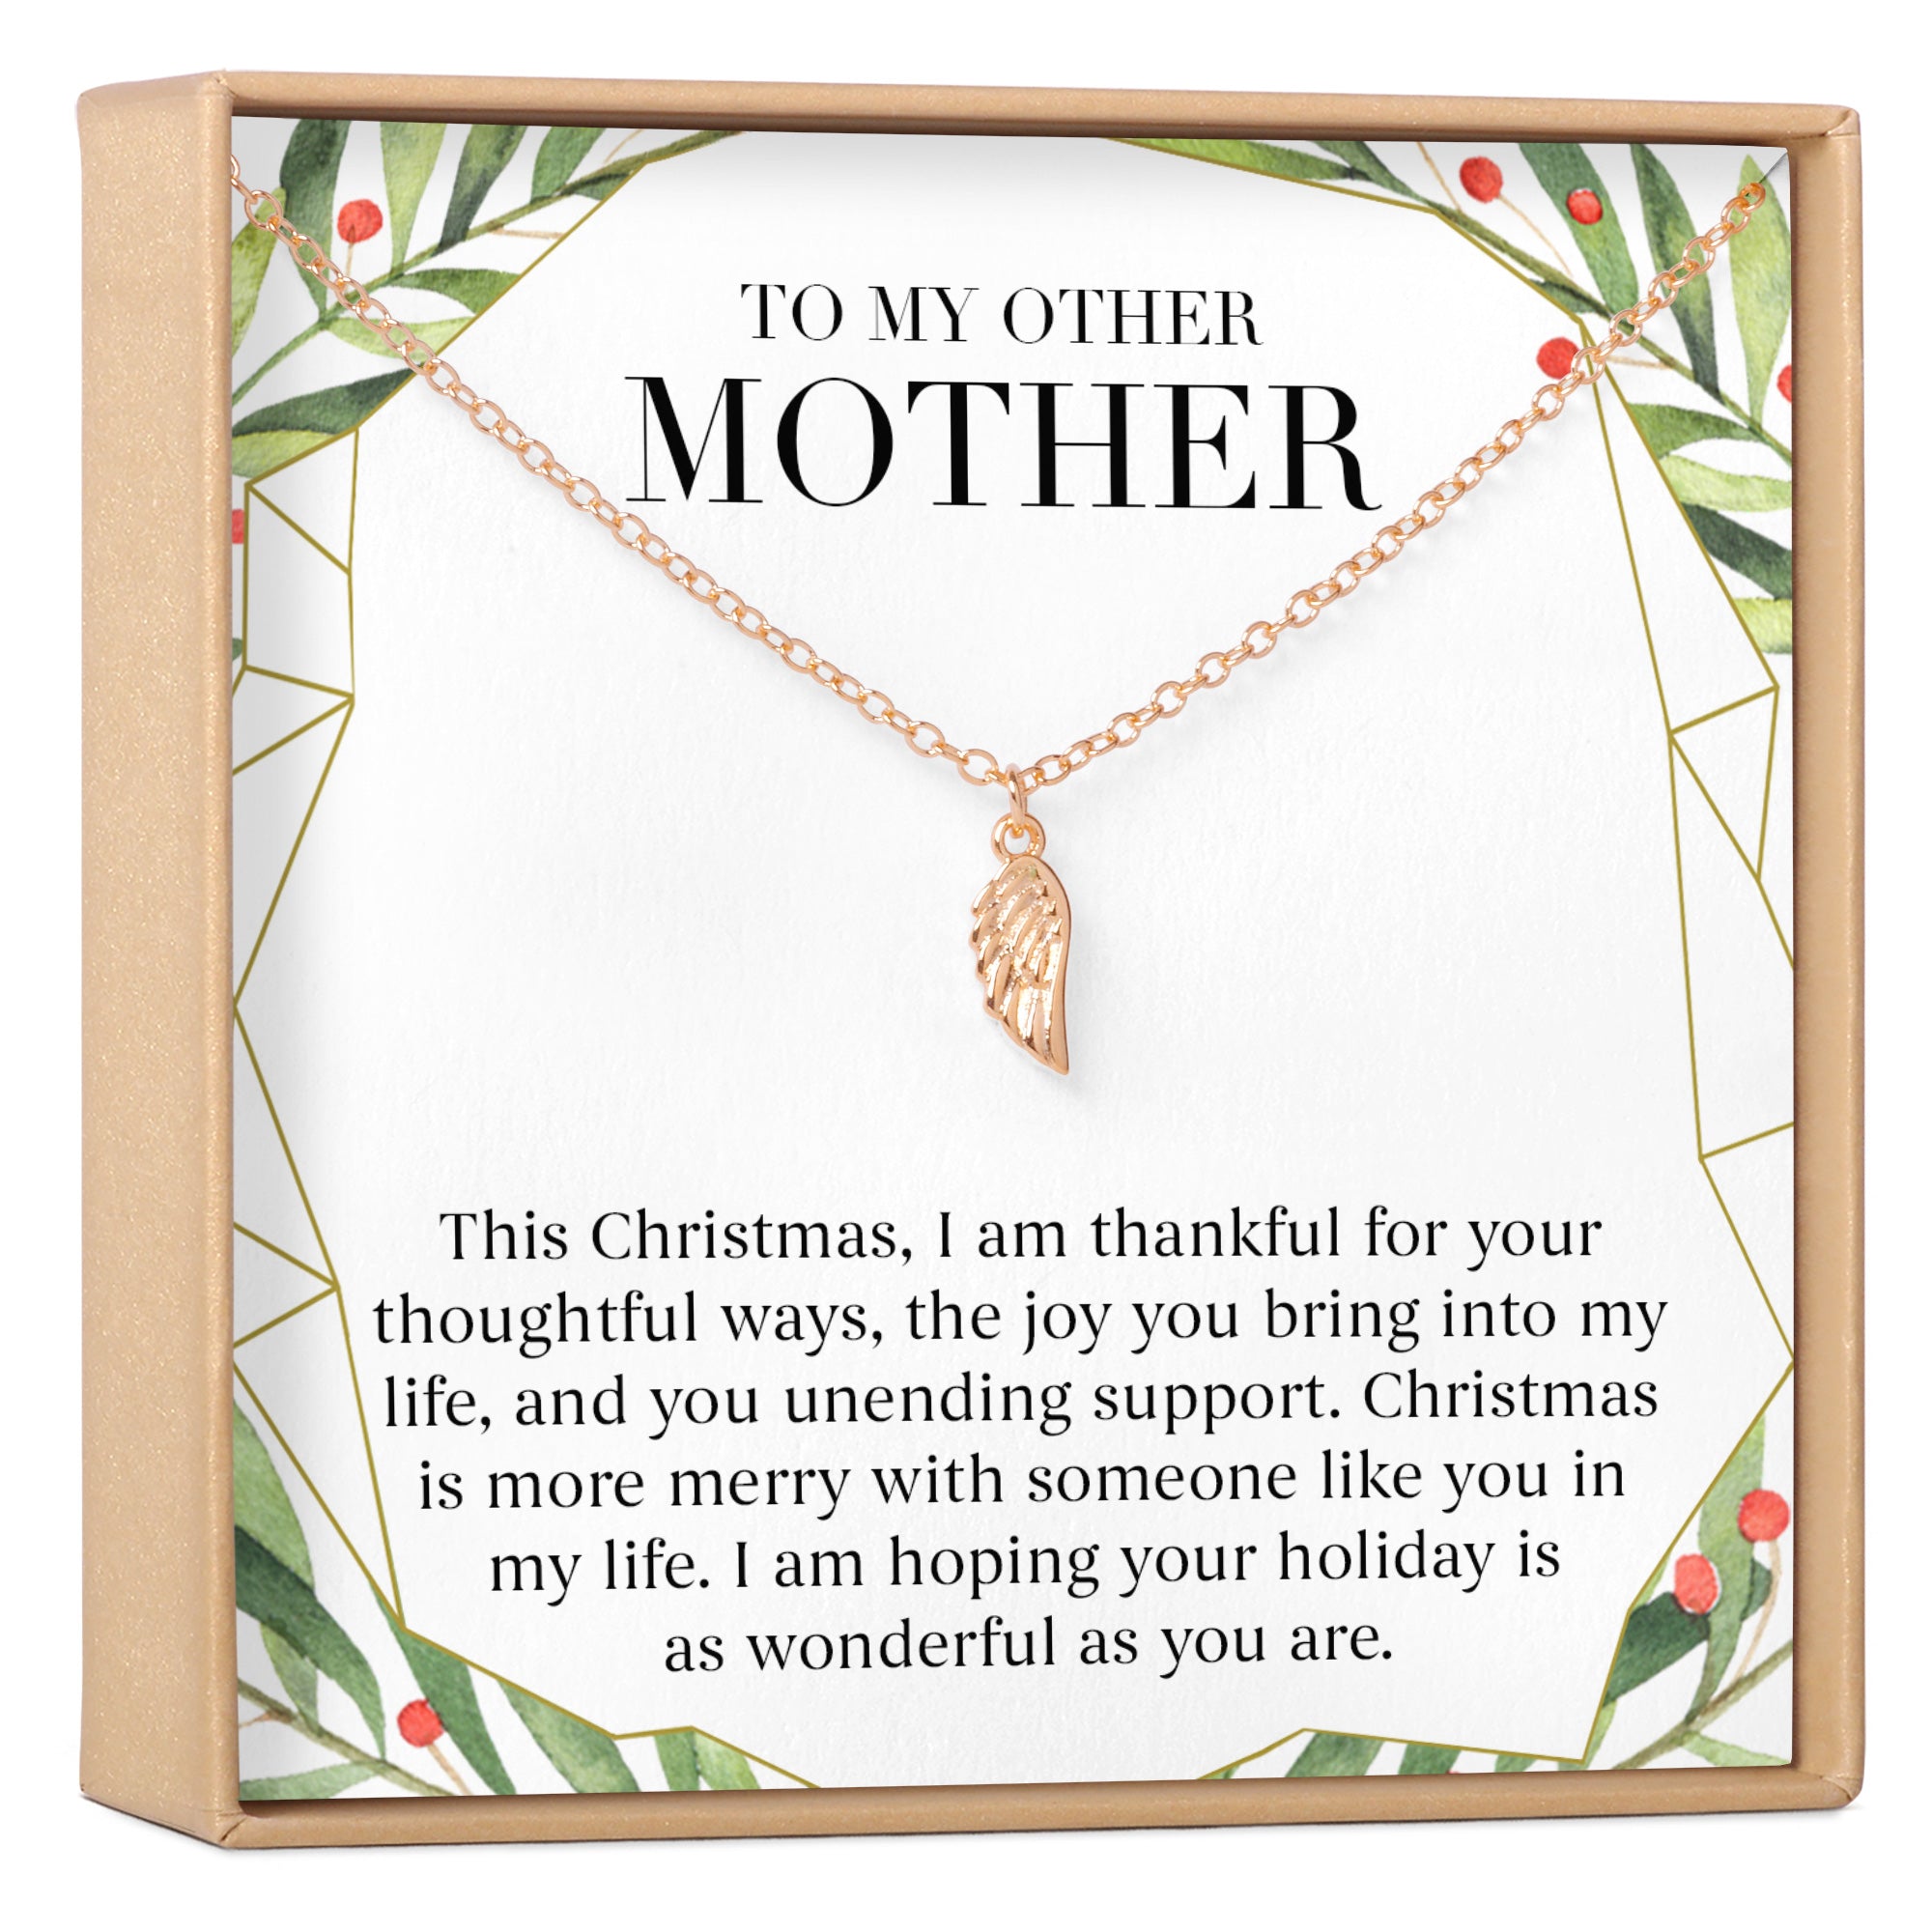 Christmas Gift for Mom: Present, Necklace, Jewelry, Xmas Gift, Holiday Gift,  Gift Idea, Mother, Mom Gift, Mother Daughter Gift, 2 Asymmetrical Circles -  Dear Ava